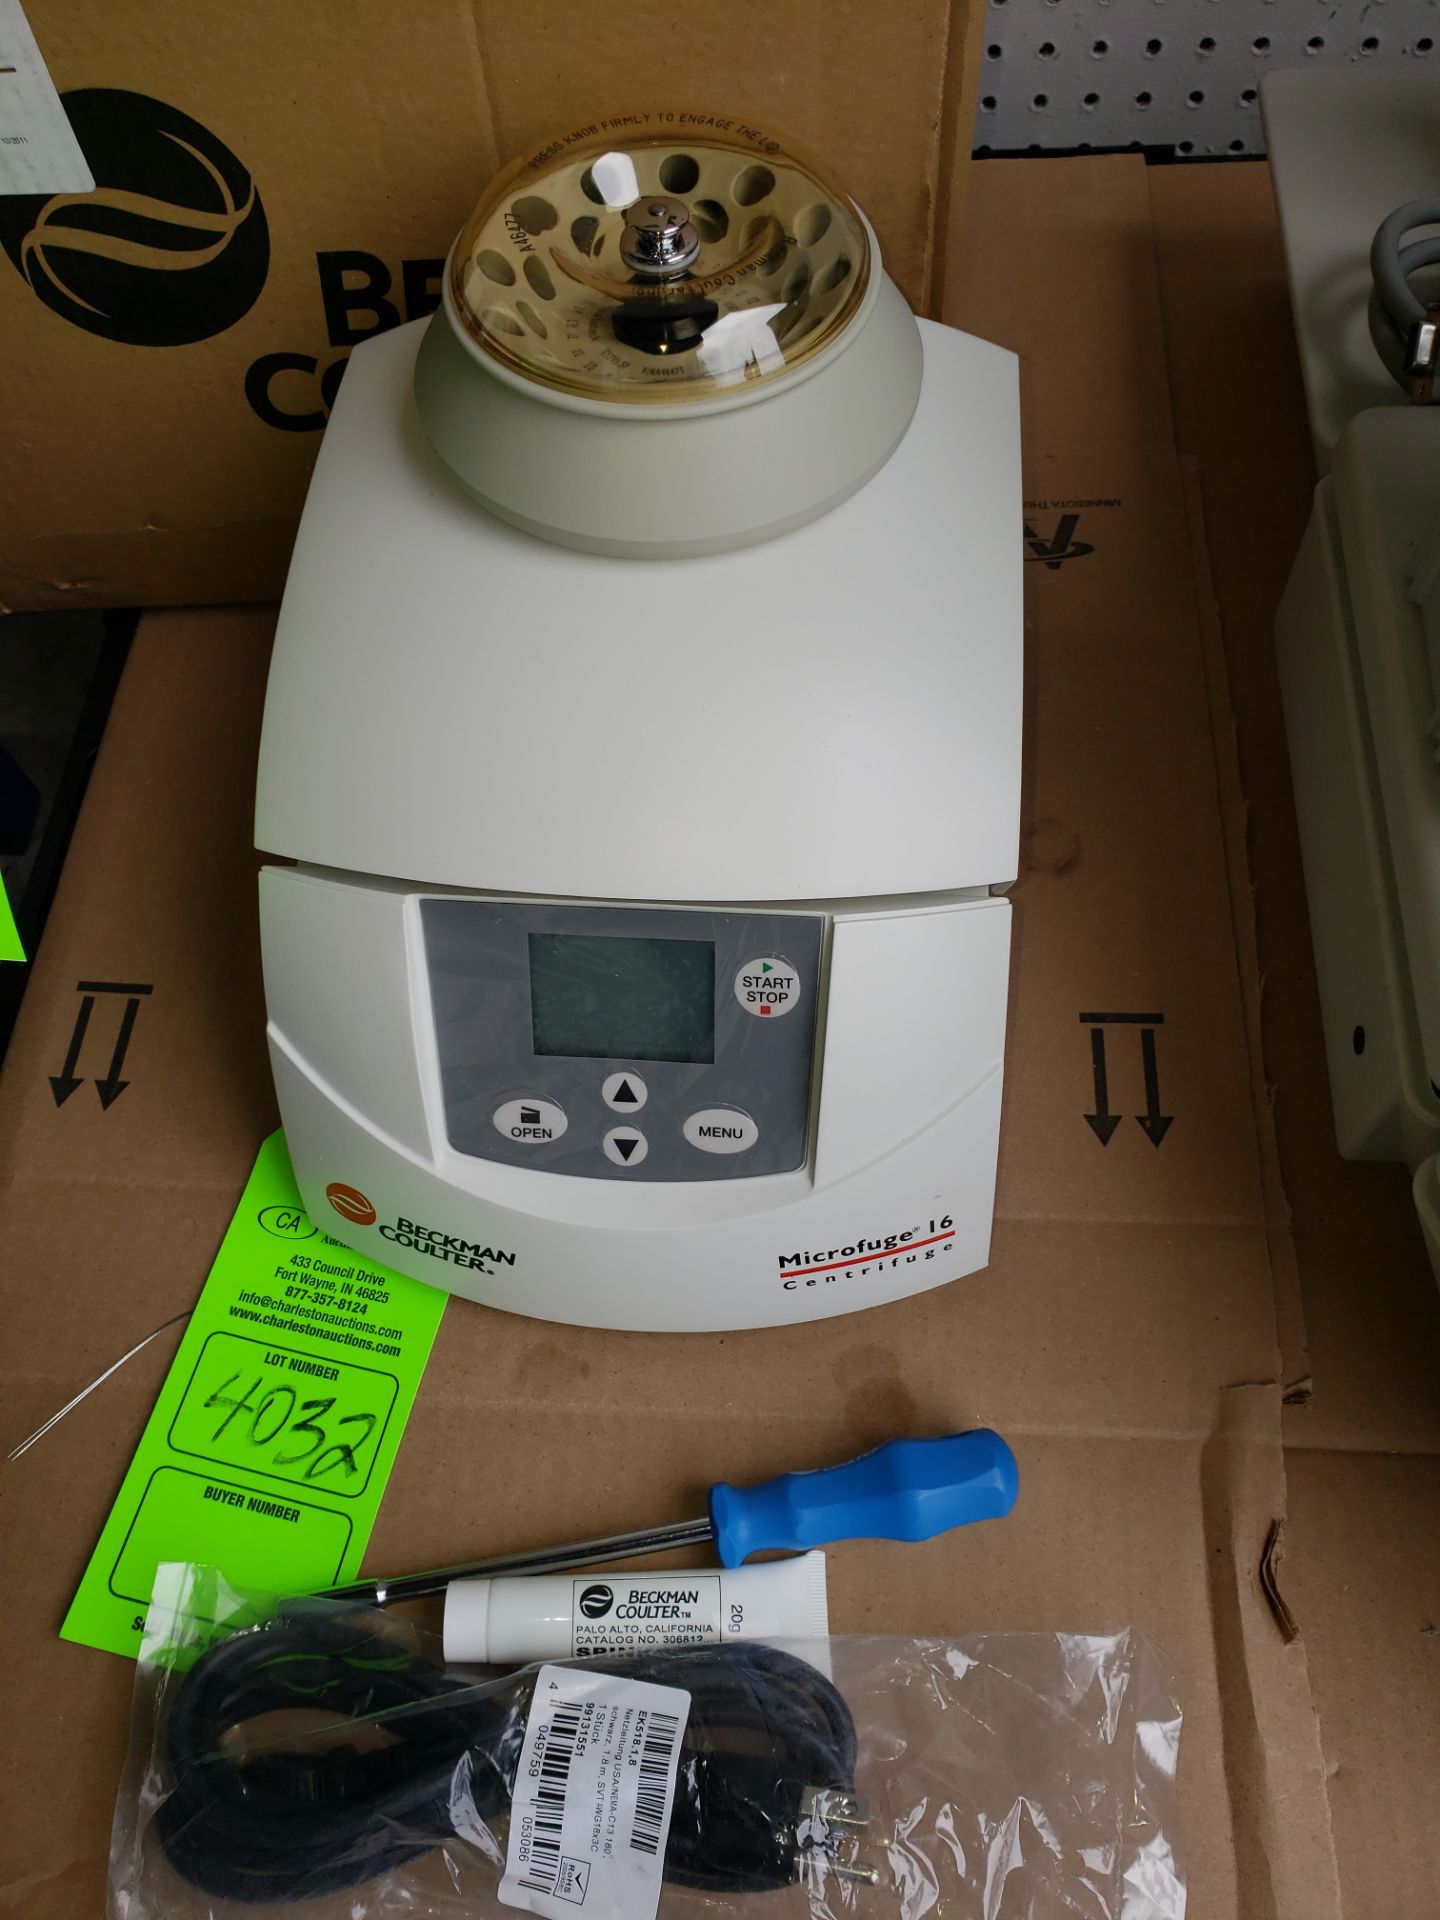 BECKMAN COULTER MICROFUGE 16 CENTRIFUGE S#MBA13M042(LOCATED AT 432 COUNCIL DRIVE, FORT WAYNE IN